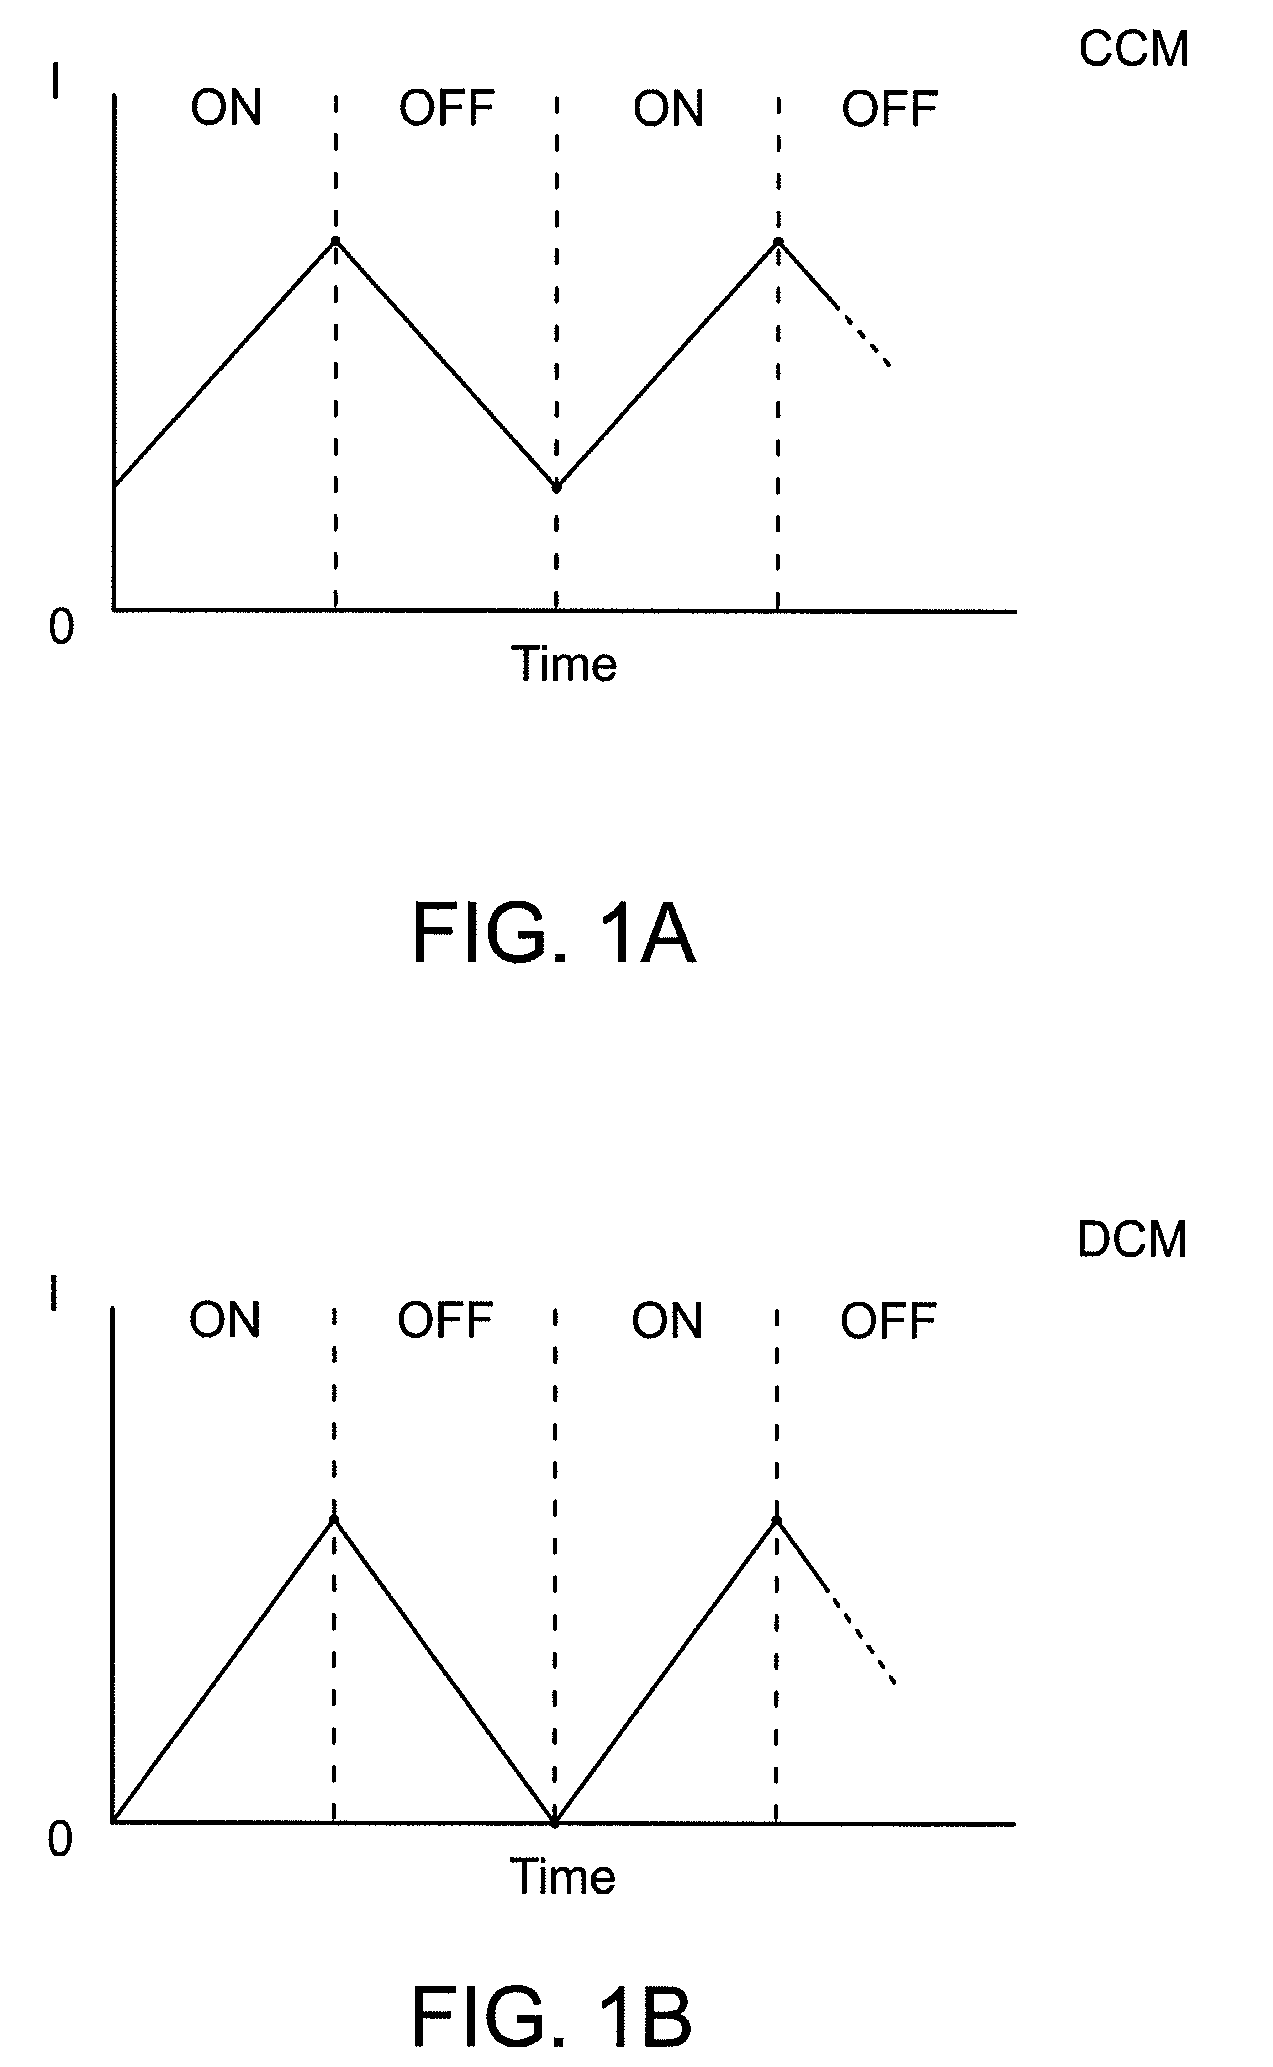 Linear, inductance based control of regulated electrical properties in a switch mode power supply of a thermal processing system